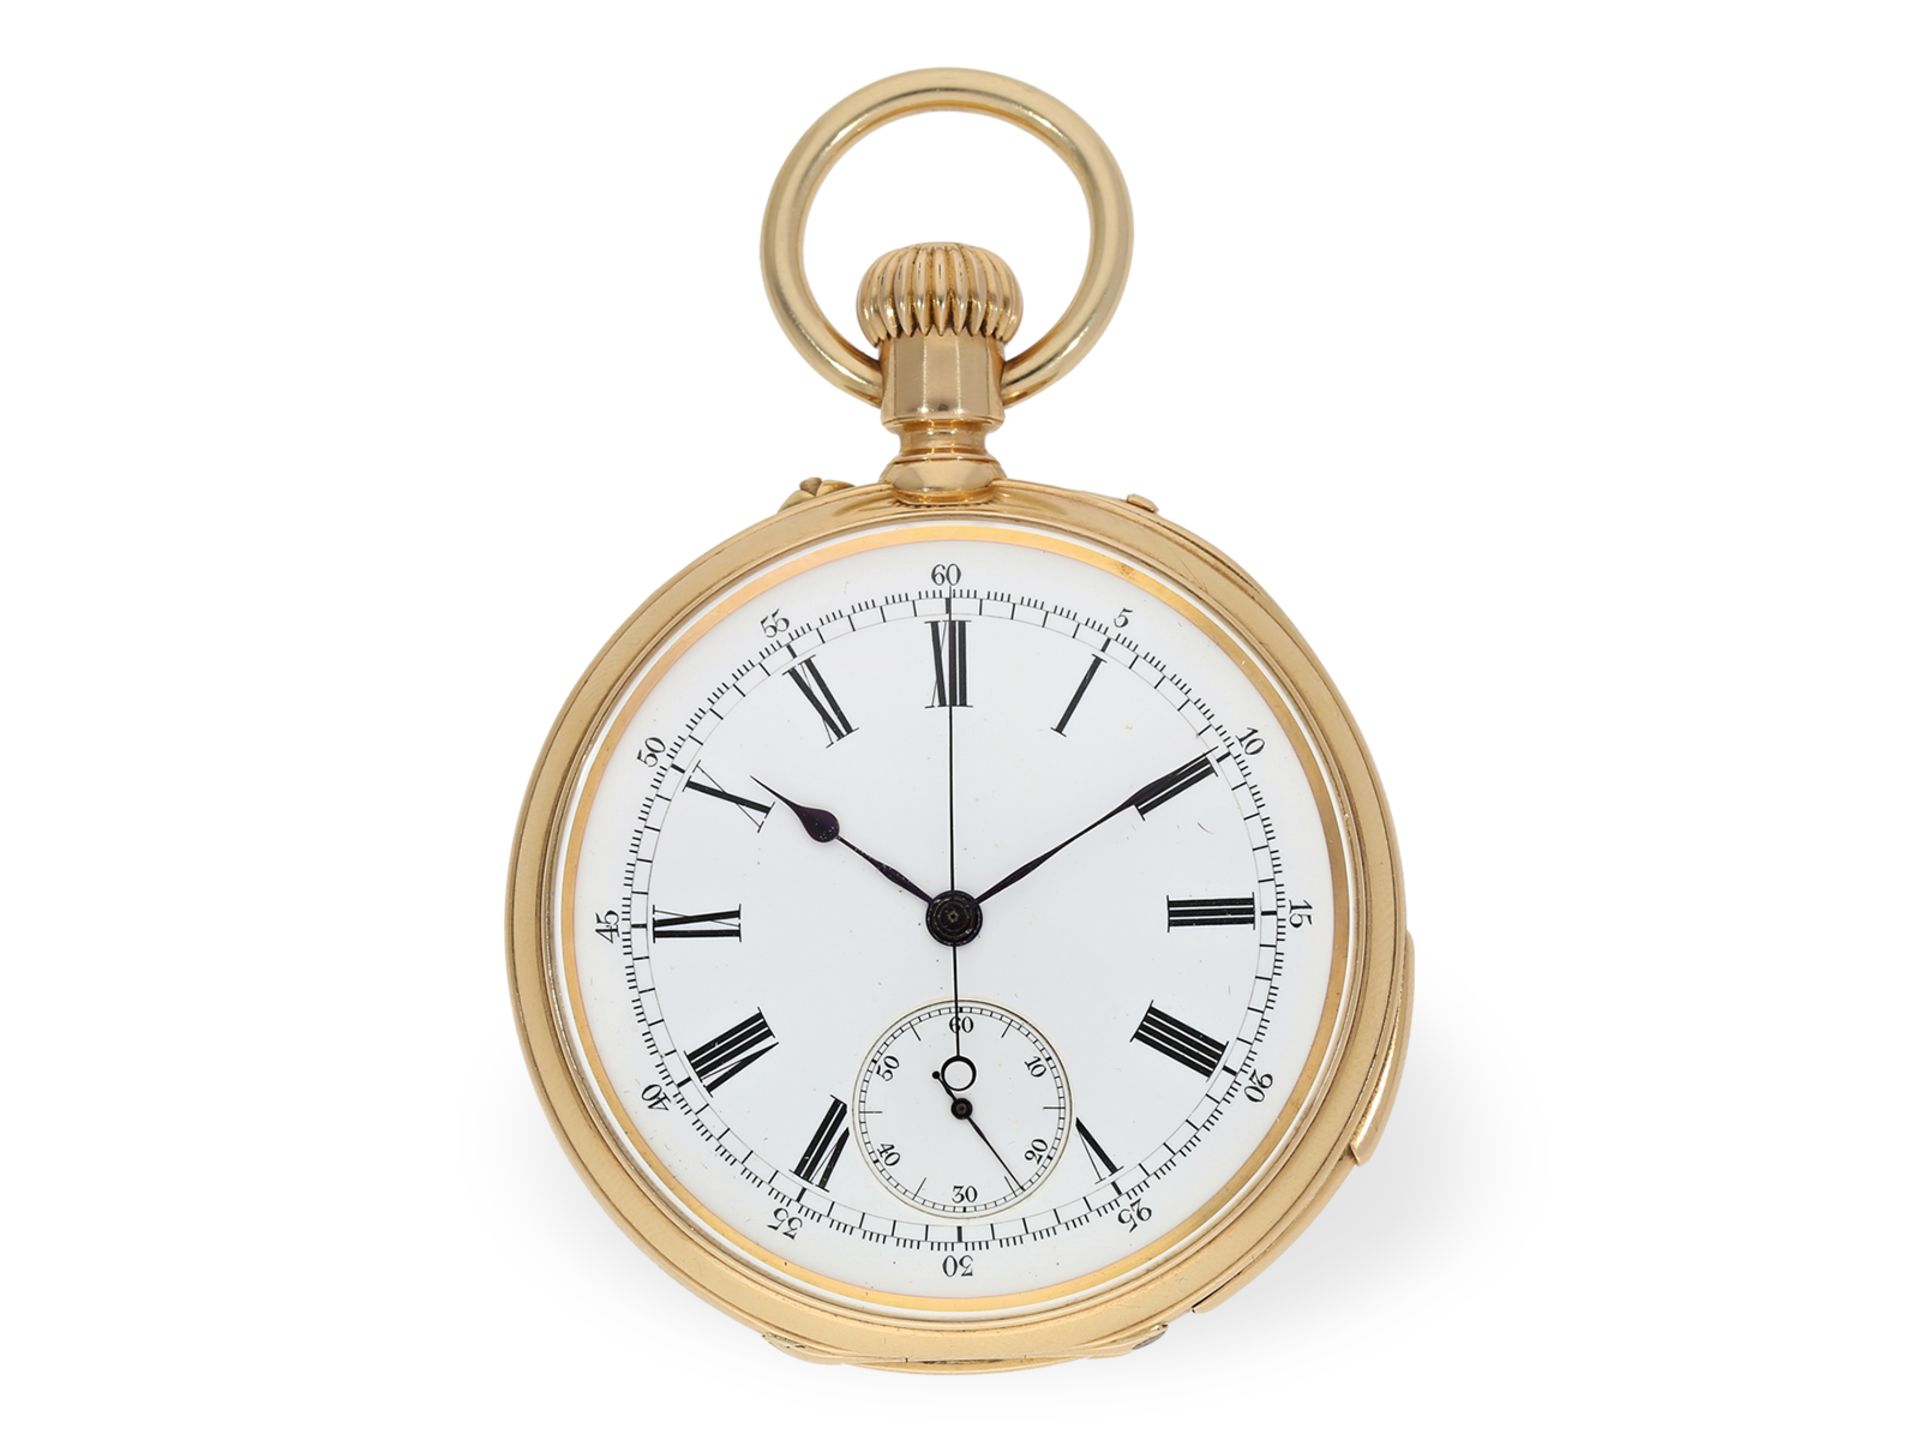 Pocket watch: Patek Philippe with double complication, chronograph and 5-minute repeater, Geneva 187